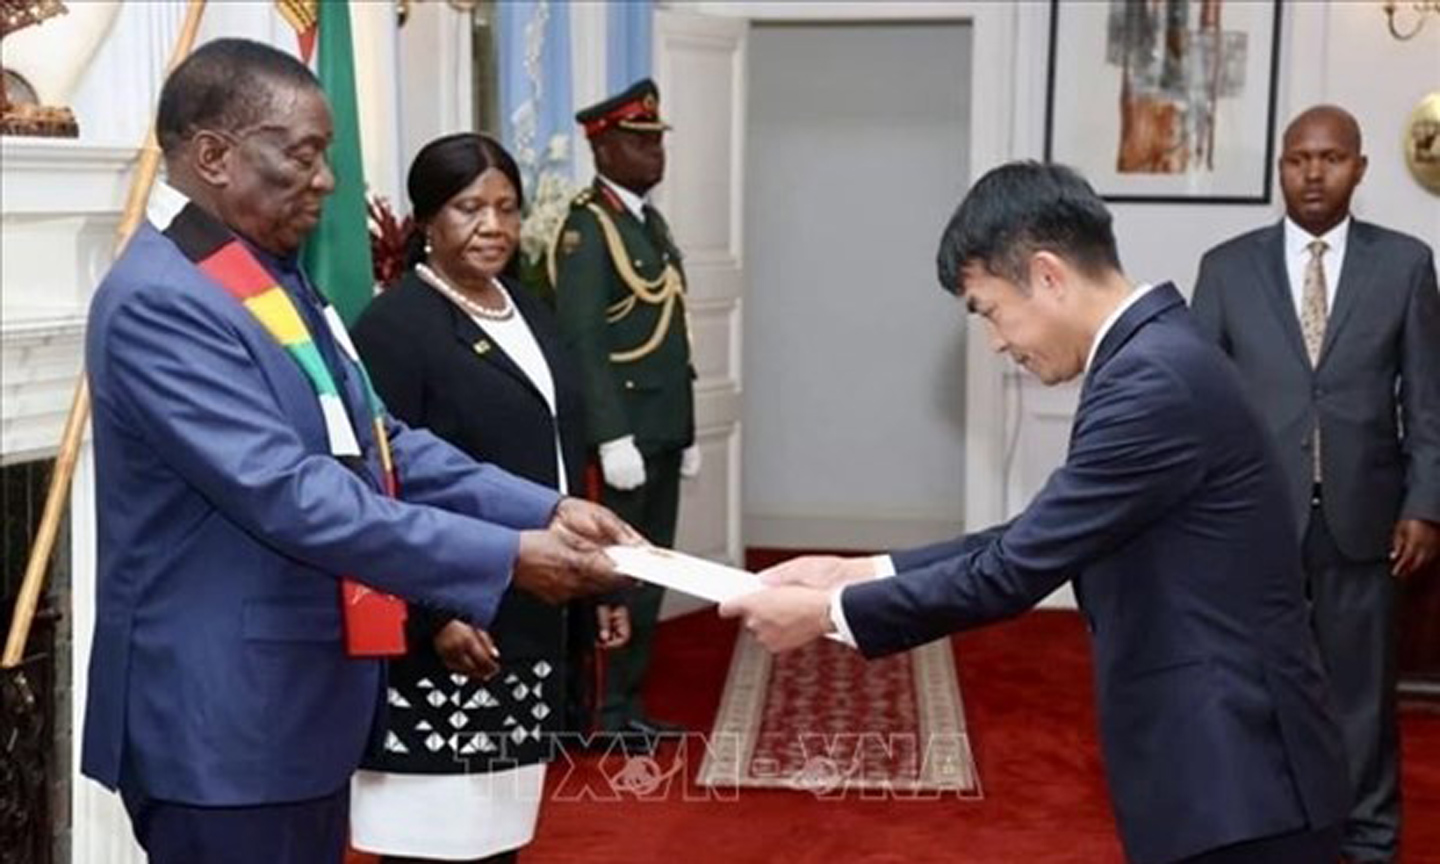 ABO/NDO- Vietnamese Ambassador to South Africa and Zimbabwe Hoang Sy Cuong presented his credential letter to Zimbabwean President Emmerson Mnangagwa on March 13.